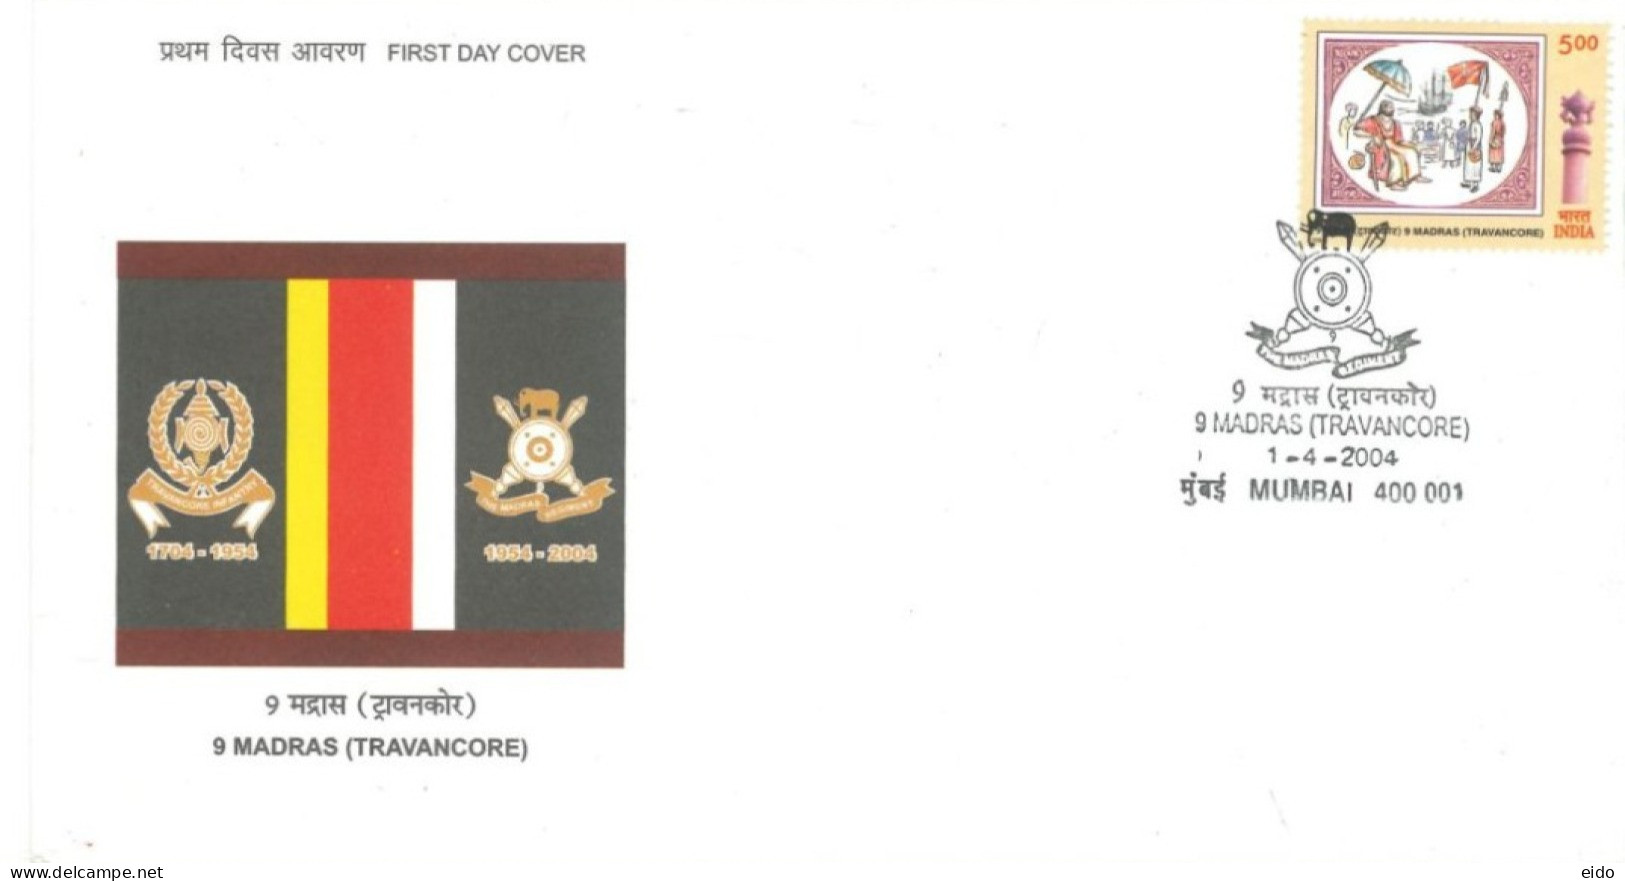 INDIA - 2004 - FDC STAMP OF 9 MADRAS (TRAVANCORE). - Covers & Documents